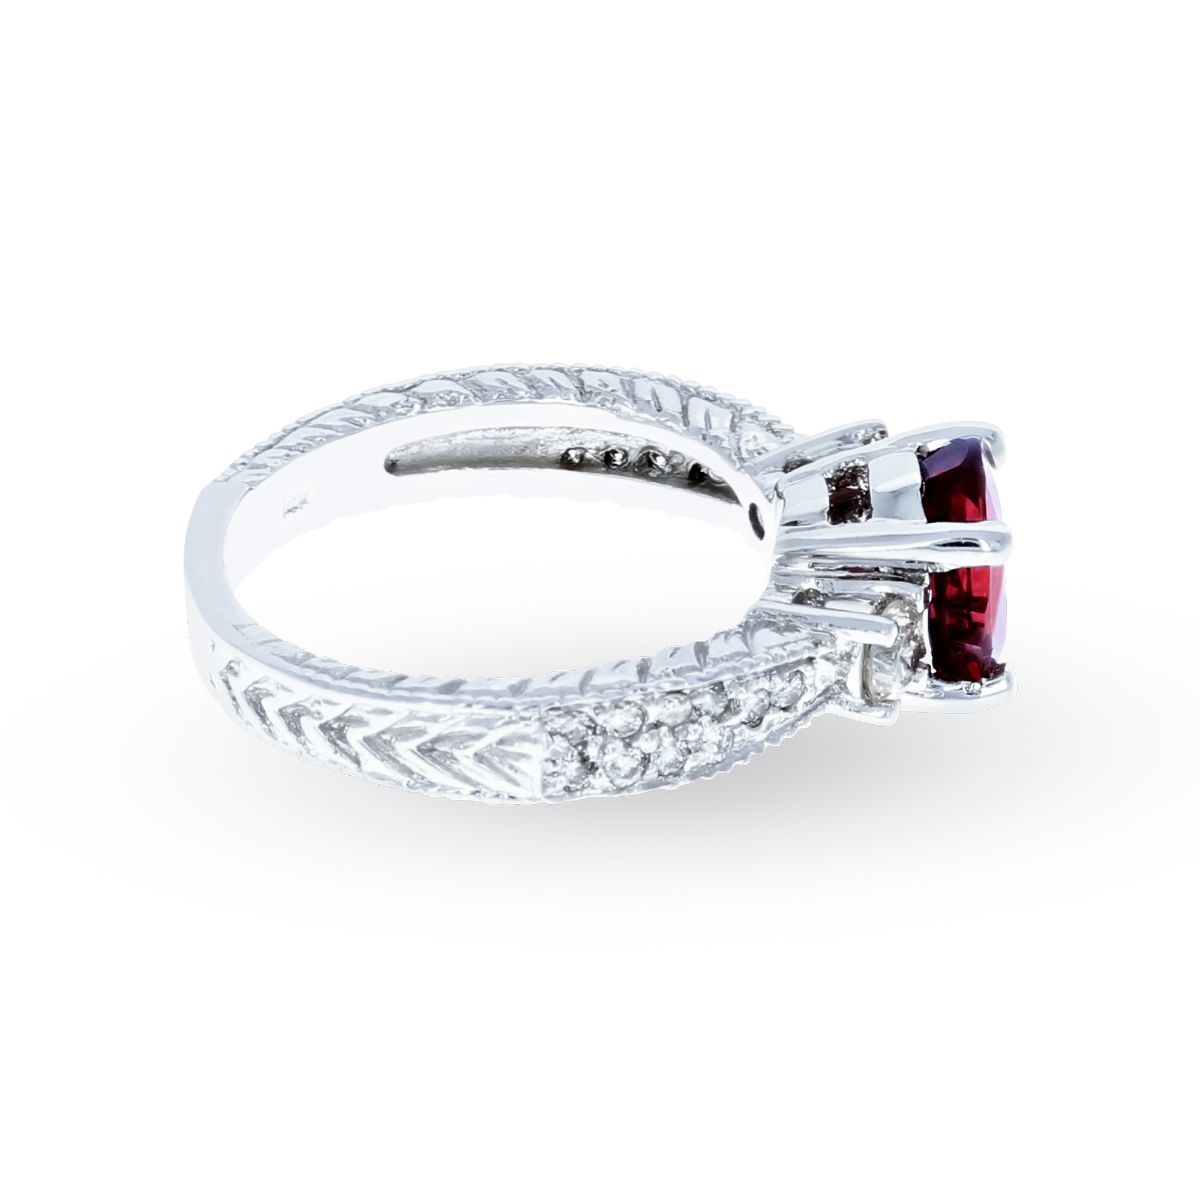 Classic Oval Ruby Diamond Ring 18KT